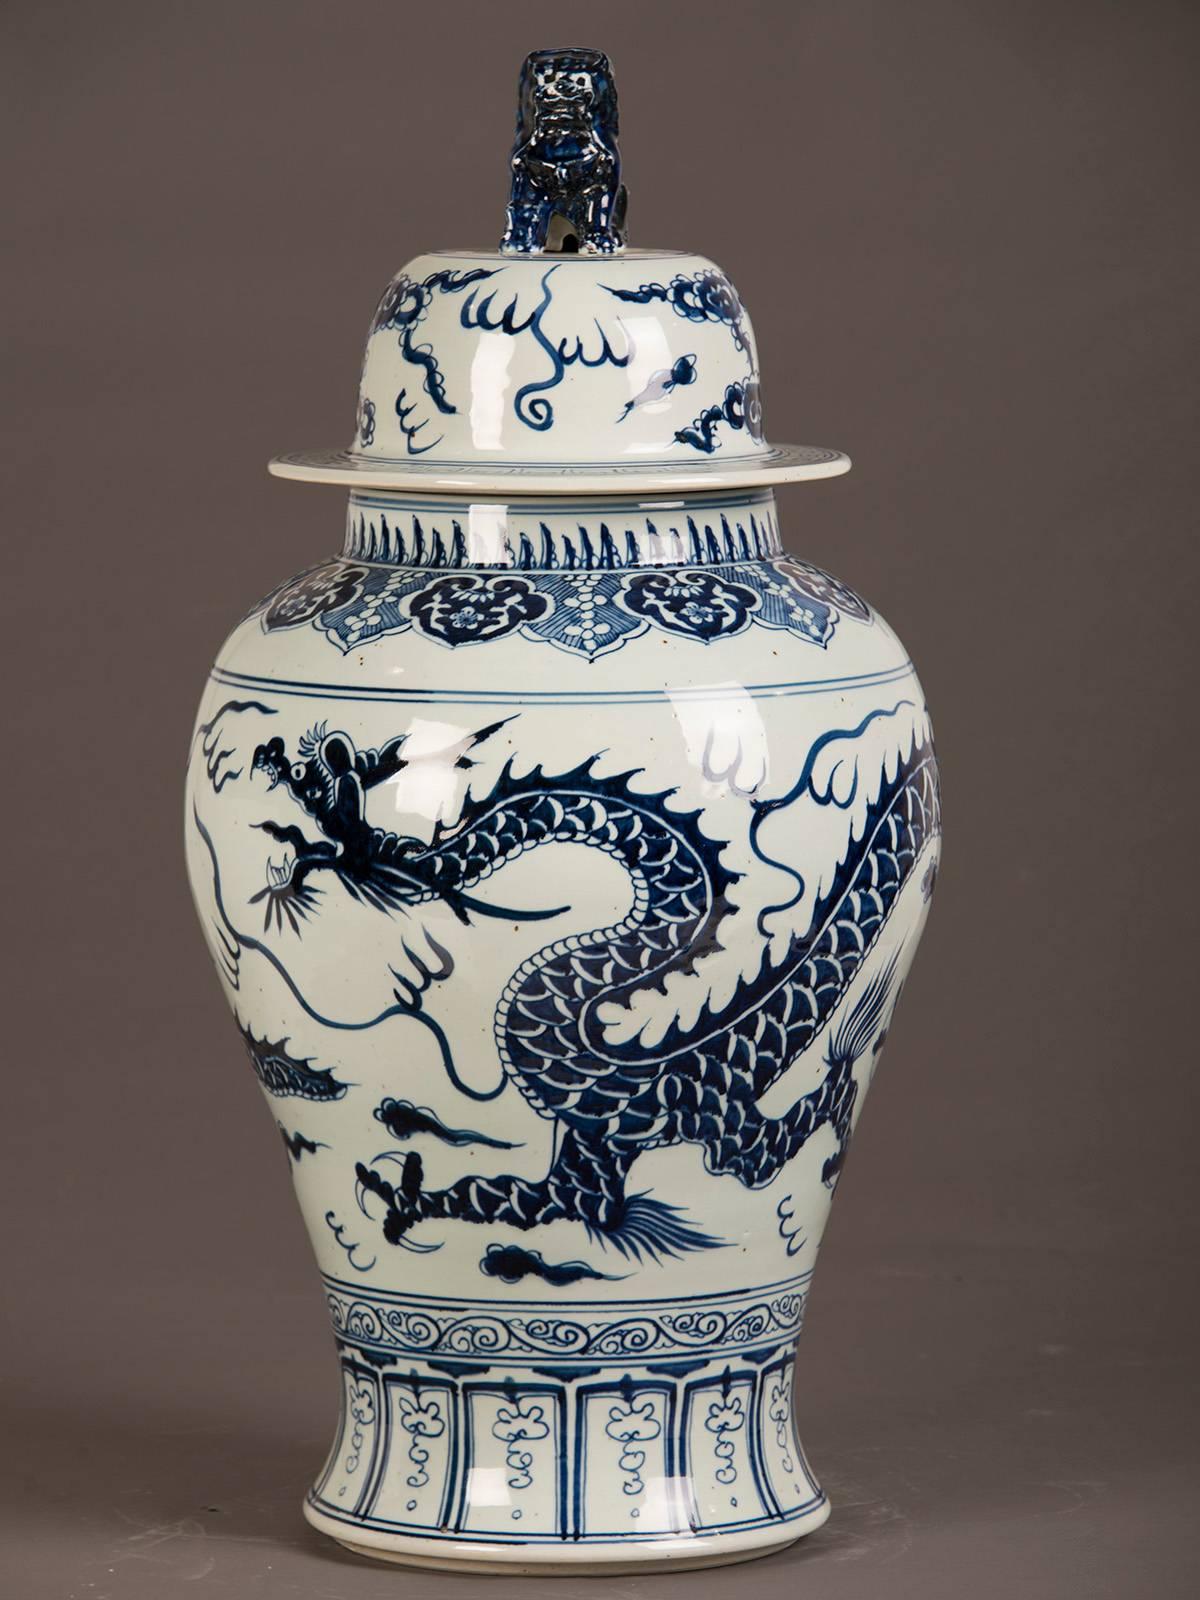 Receive our new selections direct from 1stdibs by email each week. Please click on “Follow Dealer” button below and see them first!

This hand-painted and glazed Chinese temple jar circa 1975 features a lid topped with a foo dog finial. The bold